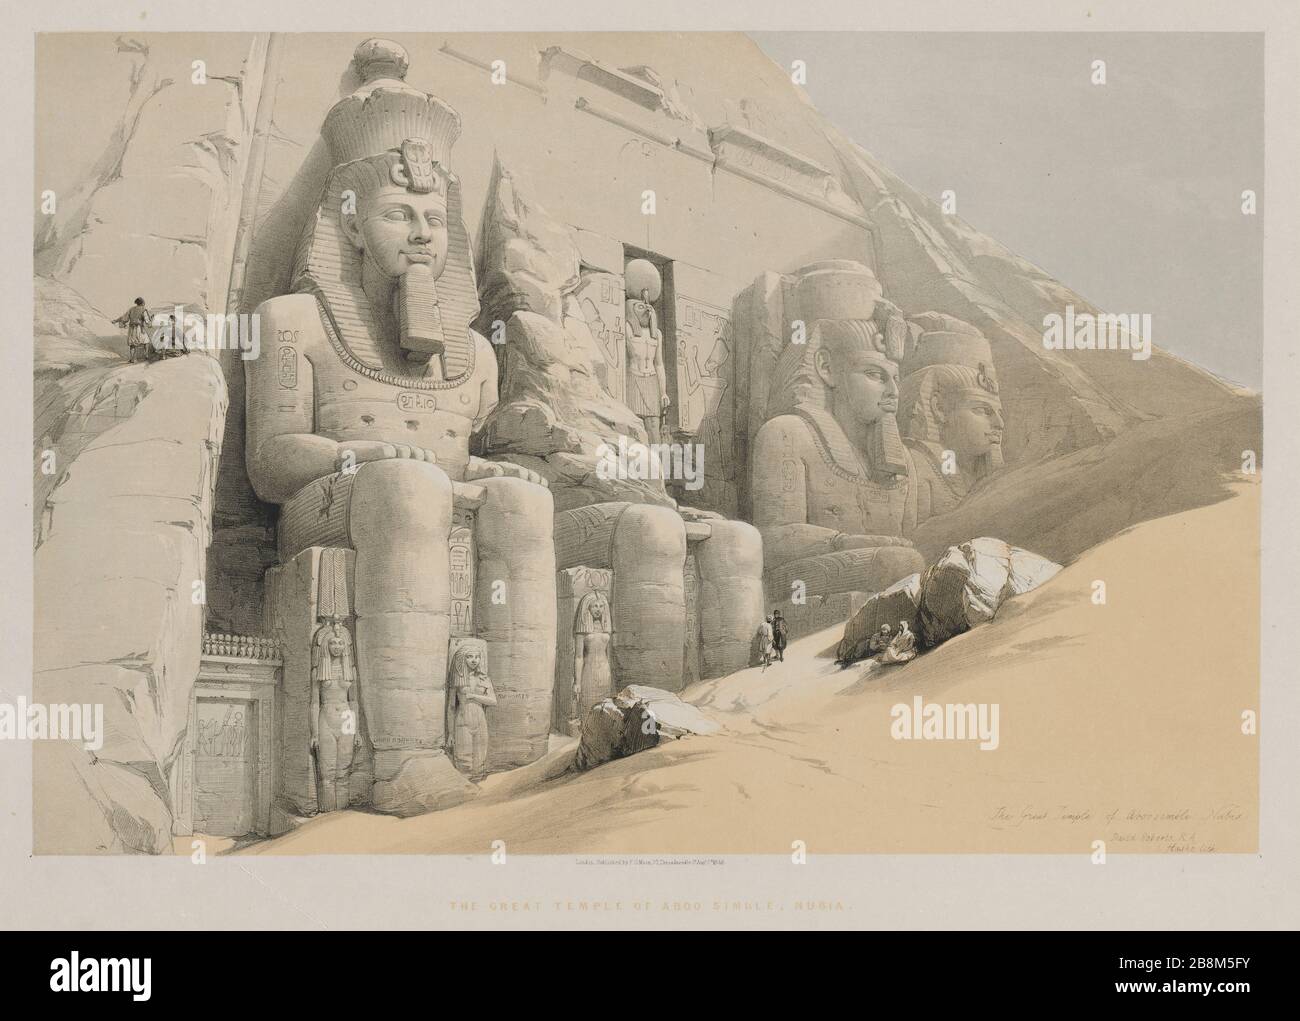 The Great Temple of Aboo-Simble (Abu Simbel), From Nubia Egypt and Nubia, Volume I: The Great Temple of Aboo-Simble, Nubia, 1846. Louis Haghe (British, 1806-1885), F.G. Moon, 20 Threadneedle Street, London, after David Roberts (British, 1796-1864). Color lithograph; Stock Photo